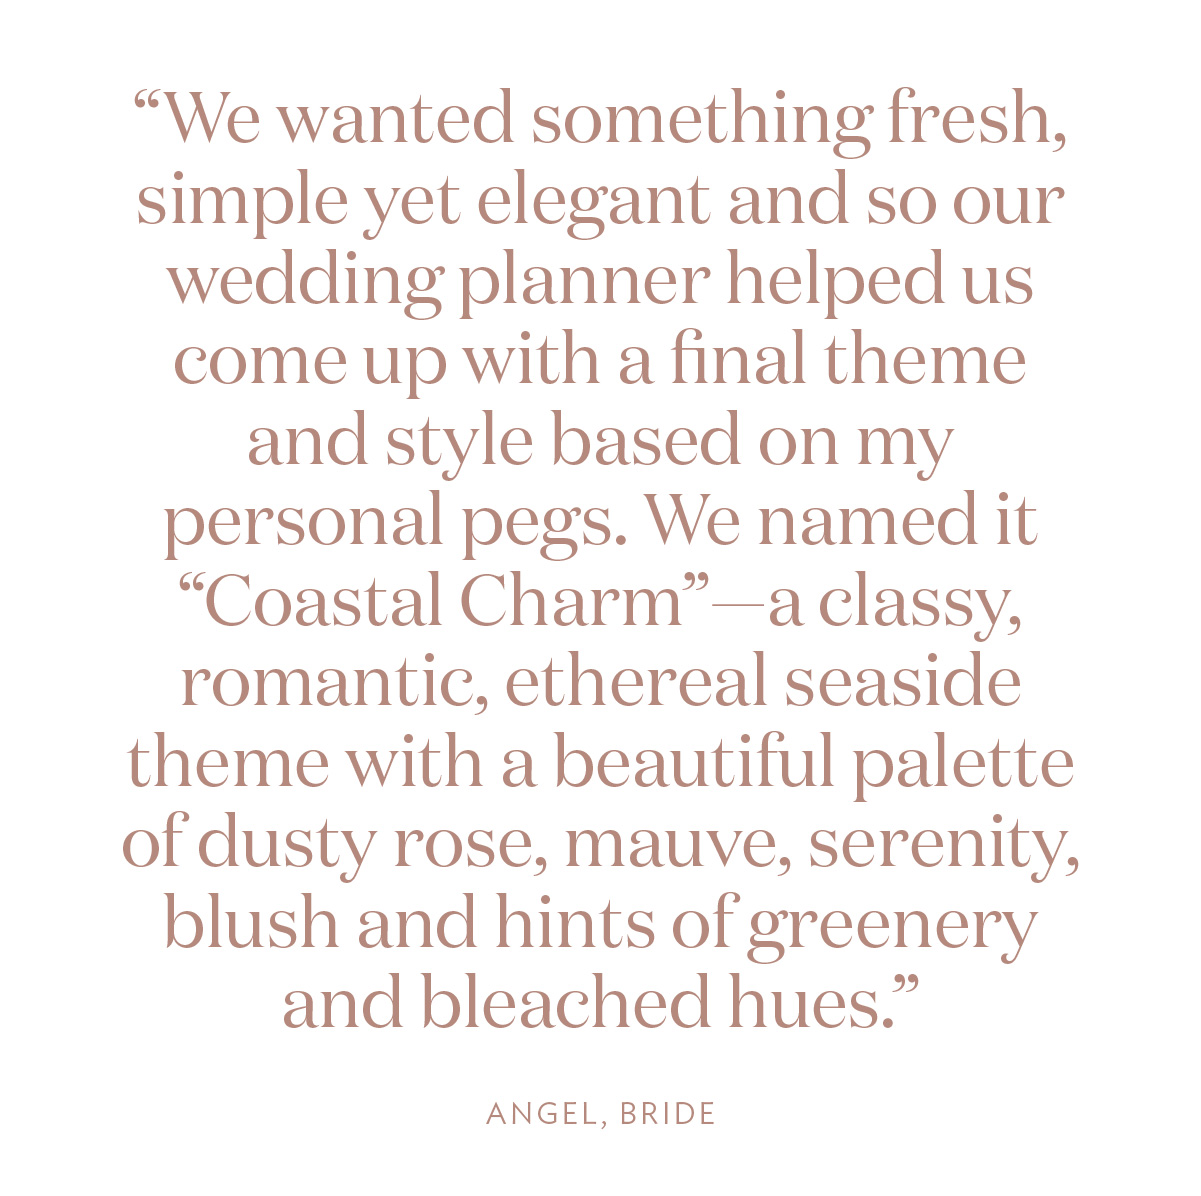 “We wanted something fresh, simple yet elegant and so our wedding planner helped us come up with a final theme and style based on my personal pegs. We named it “Coastal Charm”—a classy, romantic, ethereal seaside theme with a beautiful palette of dusty rose, mauve, serenity, blush and hints of greenery and bleached hues.” Angel, Bride